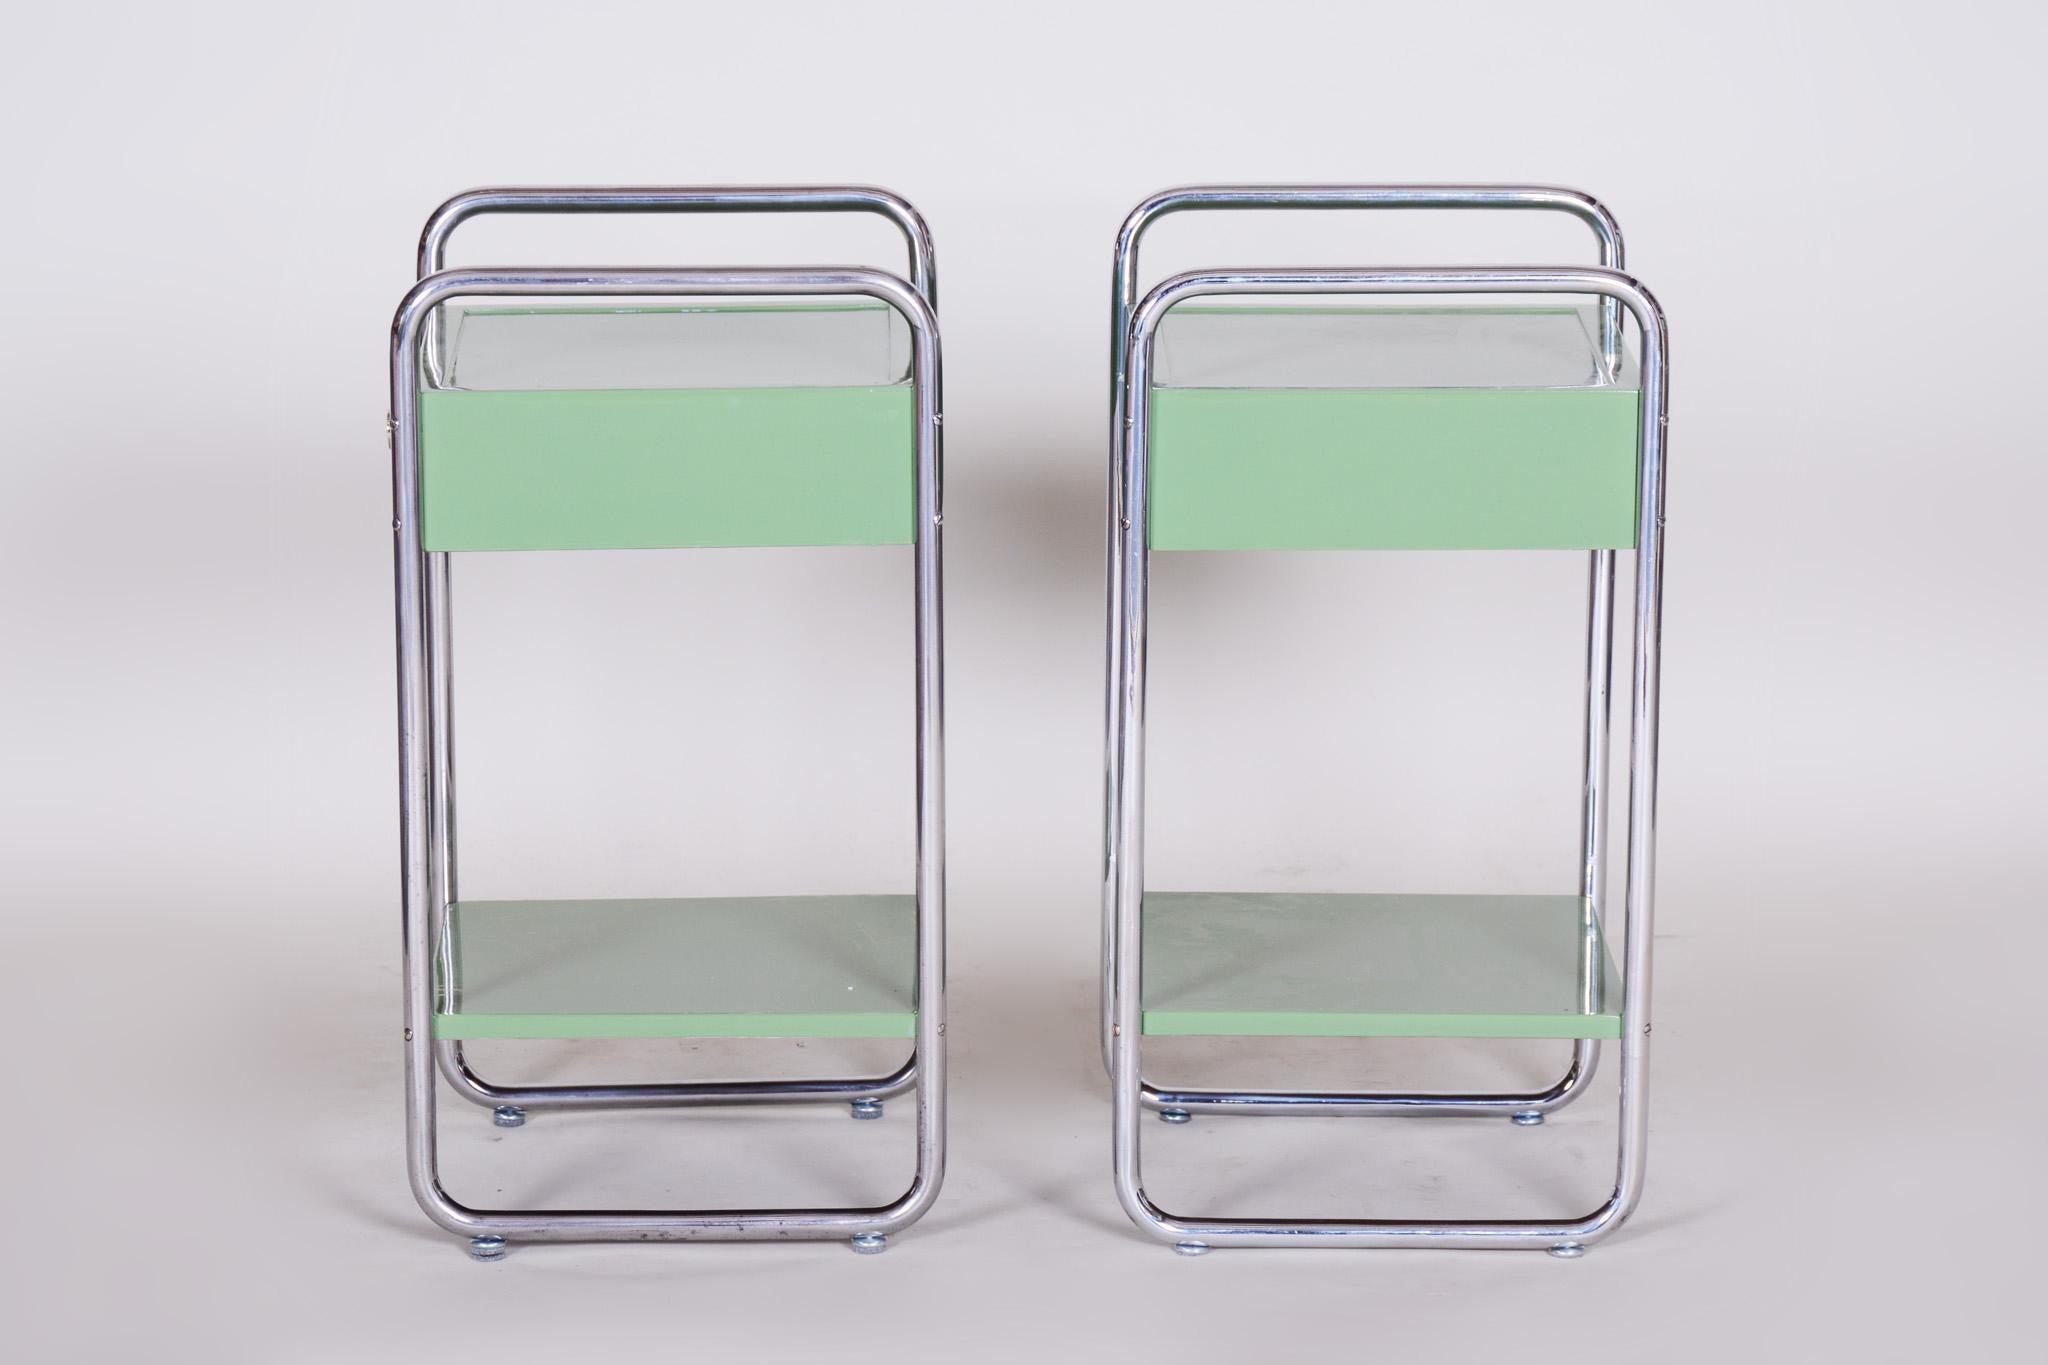 Chrome Pair of Czech Green Vintage Bauhaus Bed Side Tables, 1930s, High Gloss Lacquer